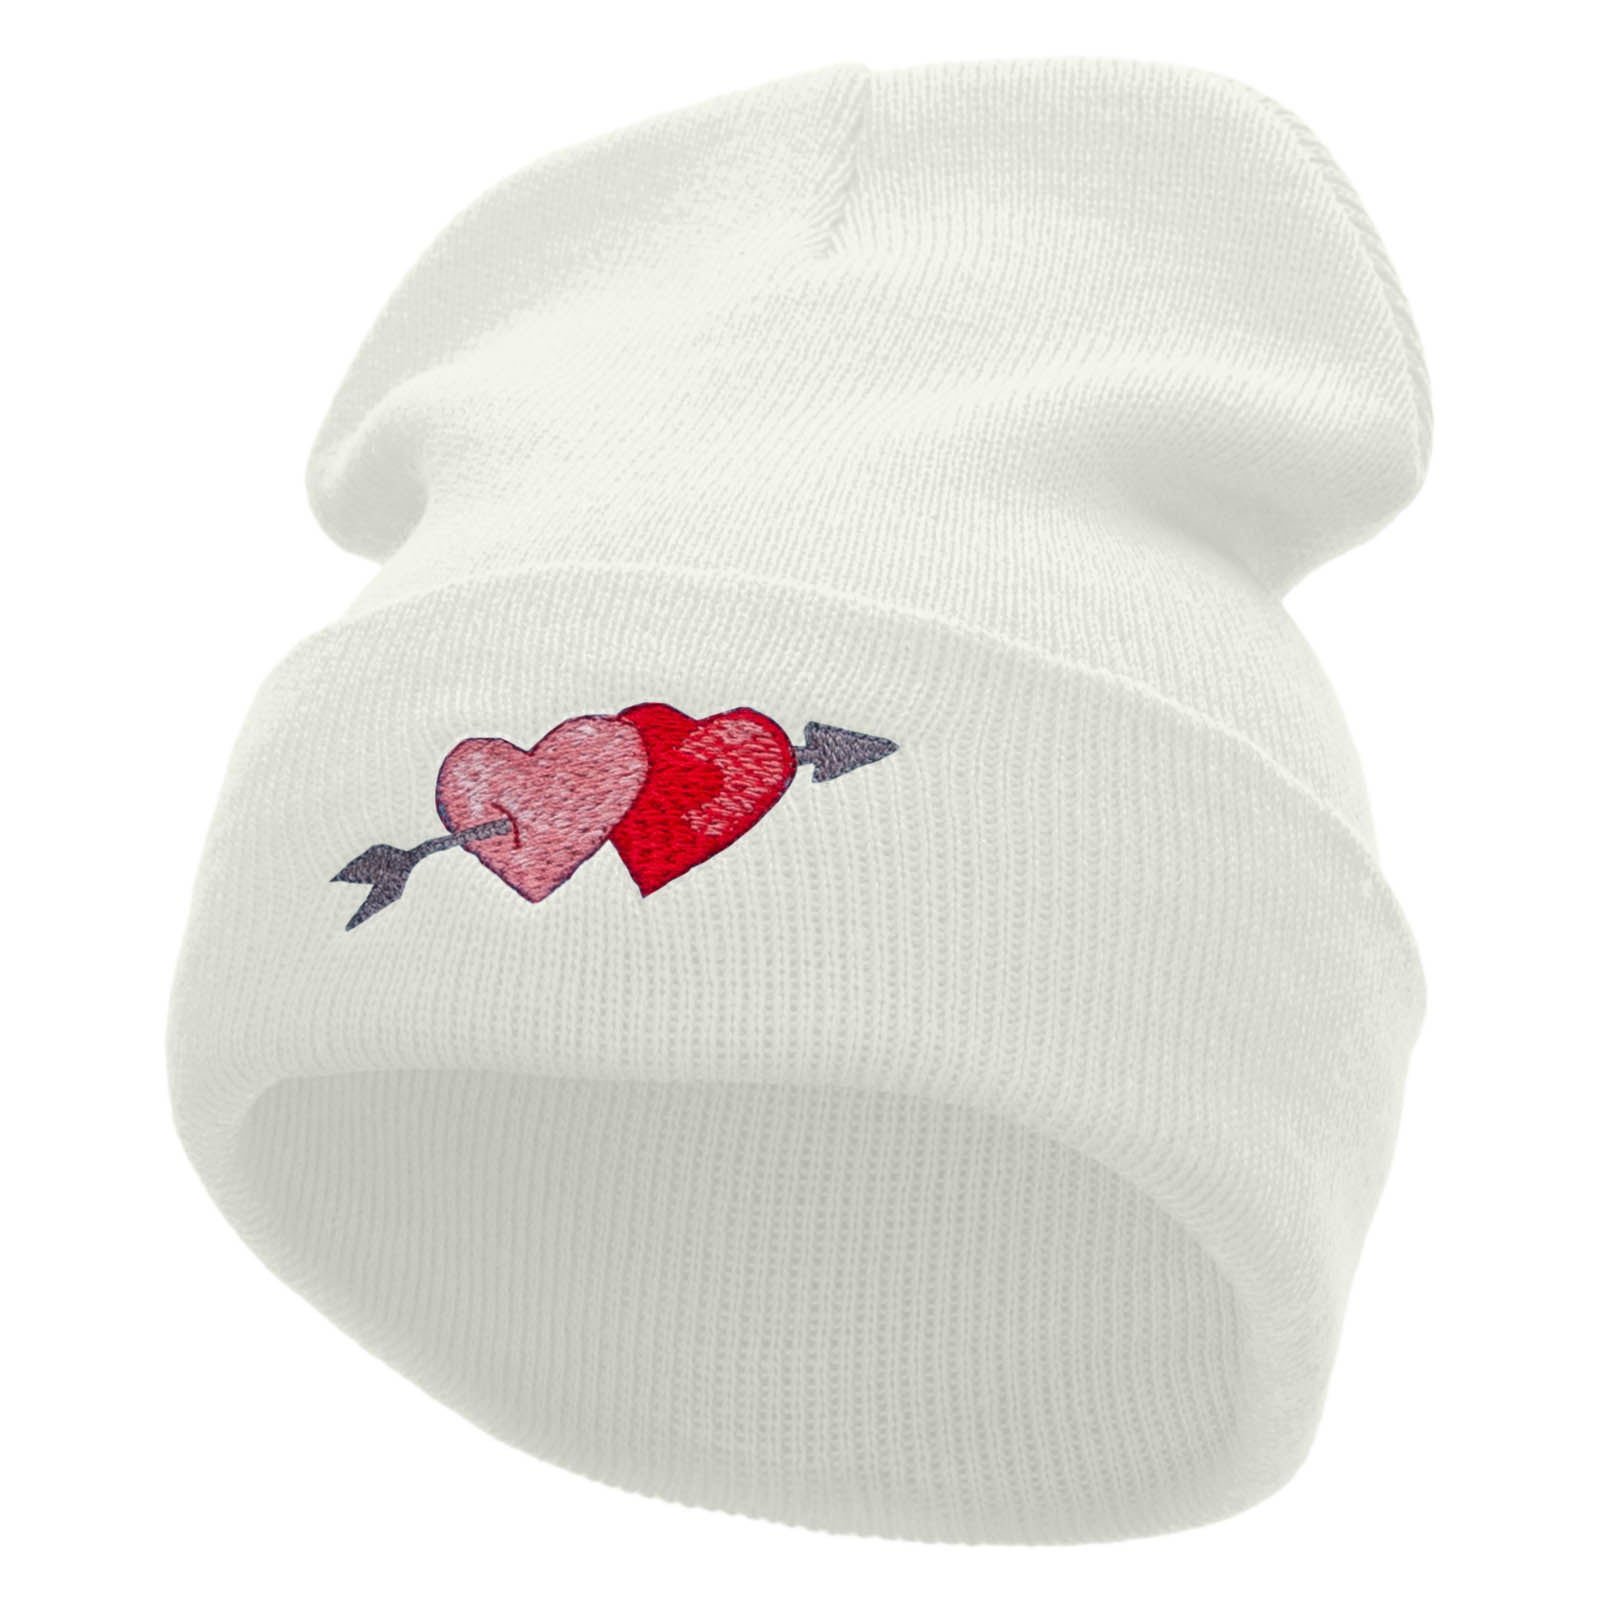 Arrow and Heart Embroidered 12 Inch Solid Long Beanie Made in USA - White OSFM